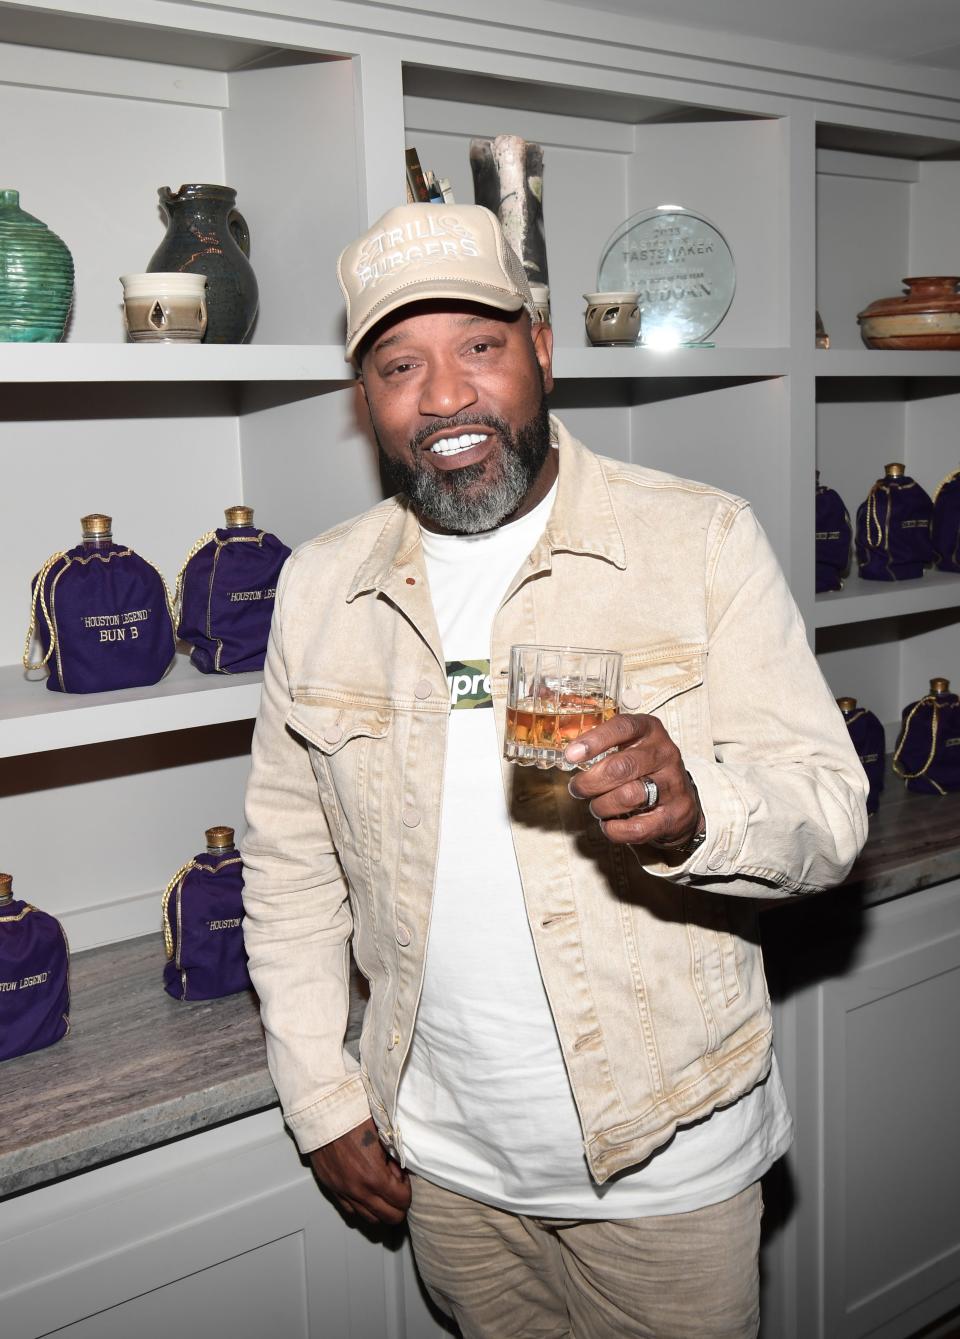 Bun B attends the Crown Royal and Bun B's Hats Off to Houston event on Feb. 29, in Houston, Texas.